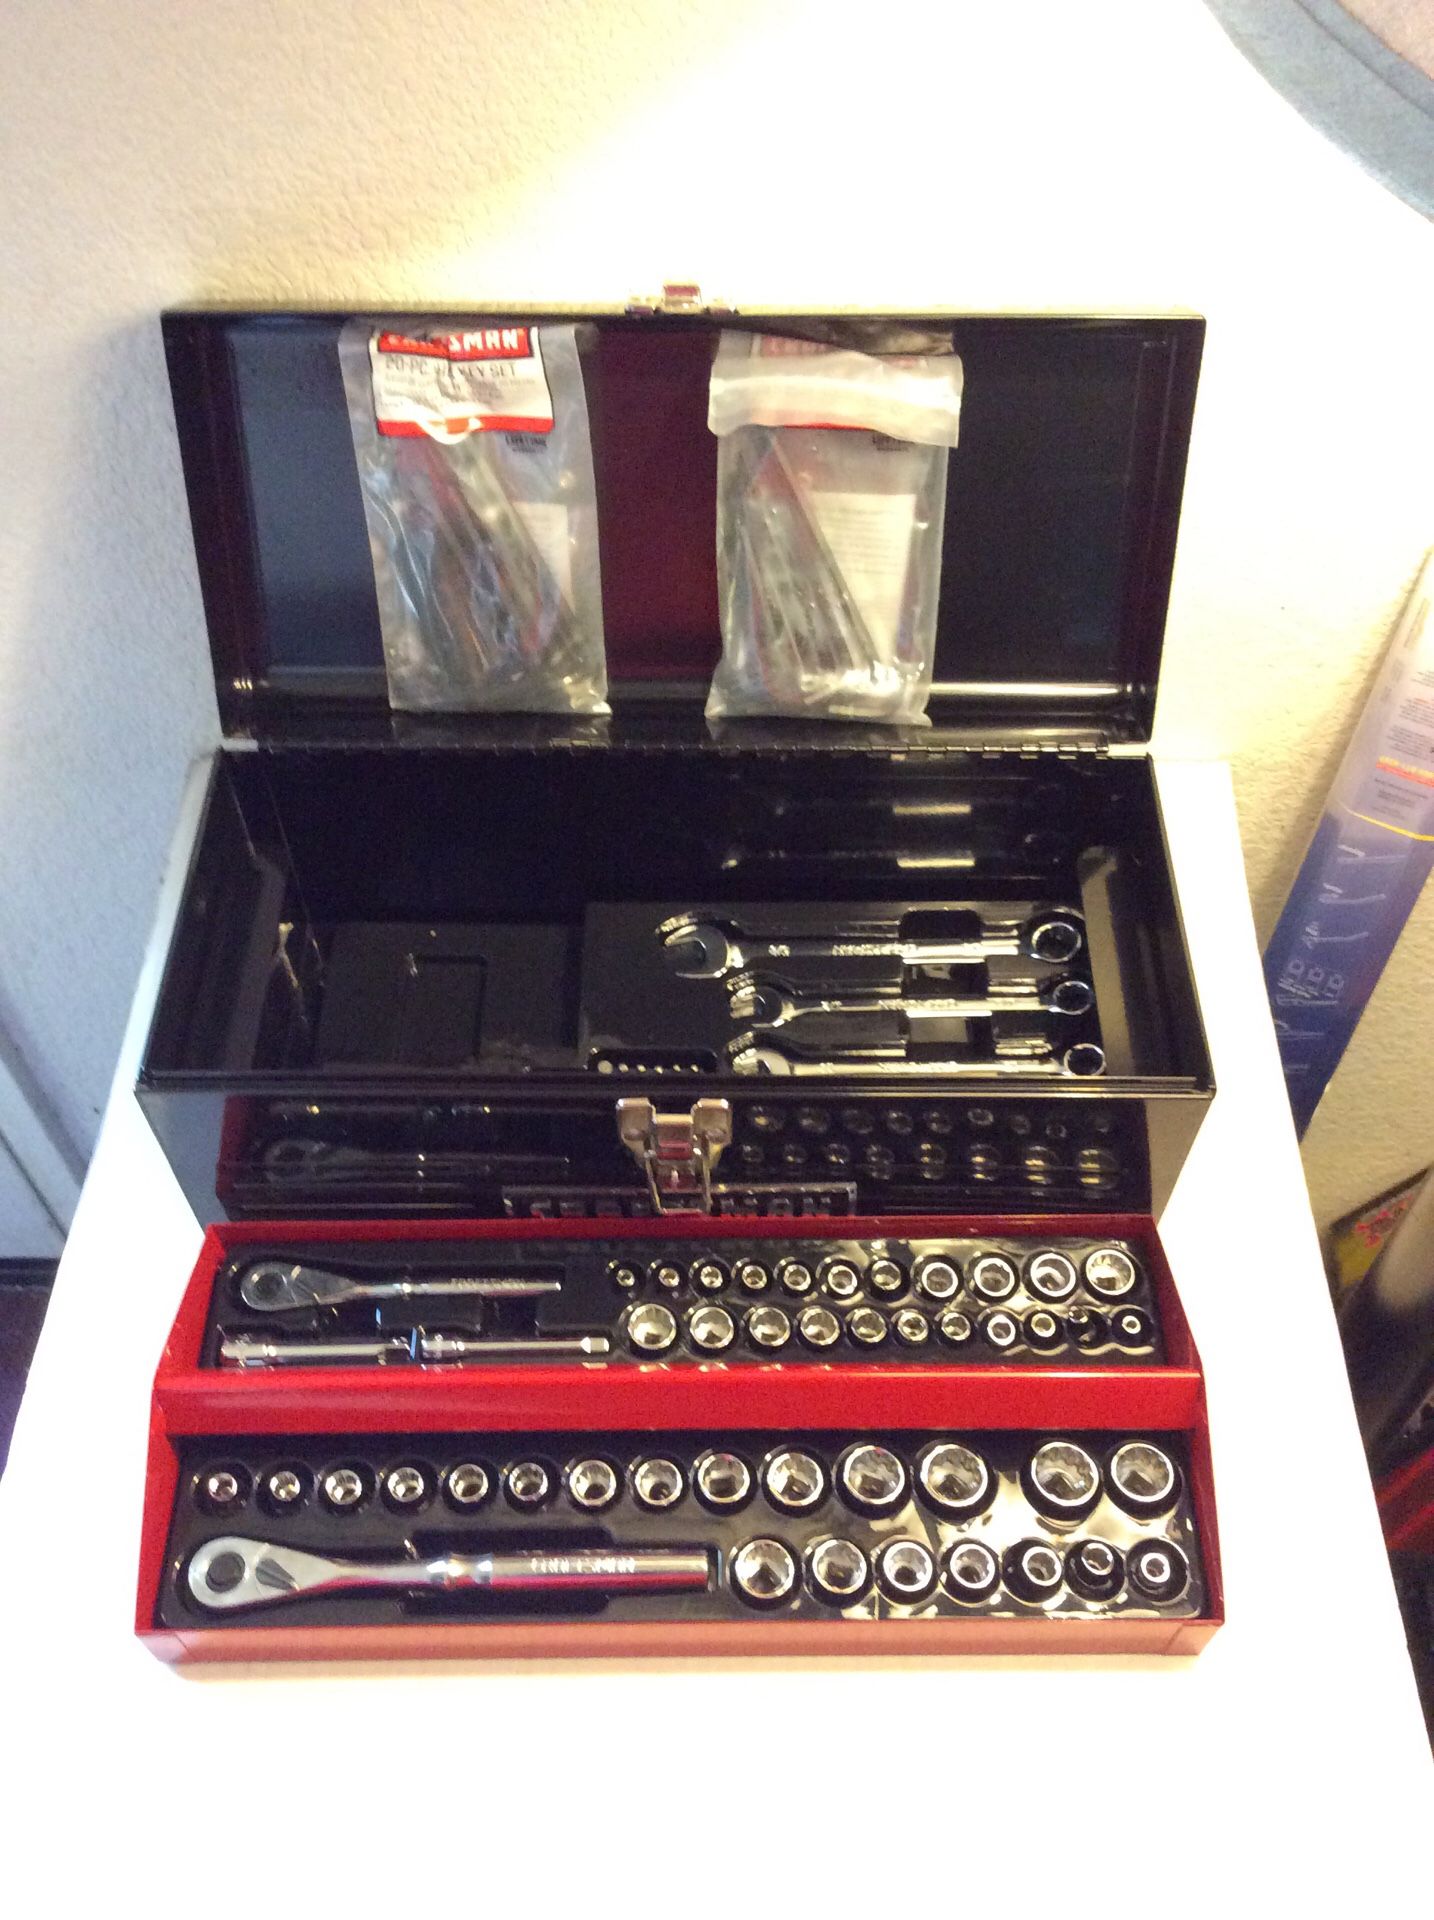 Brand New Craftsman 130 Piece Mechanics Tool Set with Metal Tool Box Just Opened it to take Pictures. 85 Firm on Price. 85 Firme en Precio